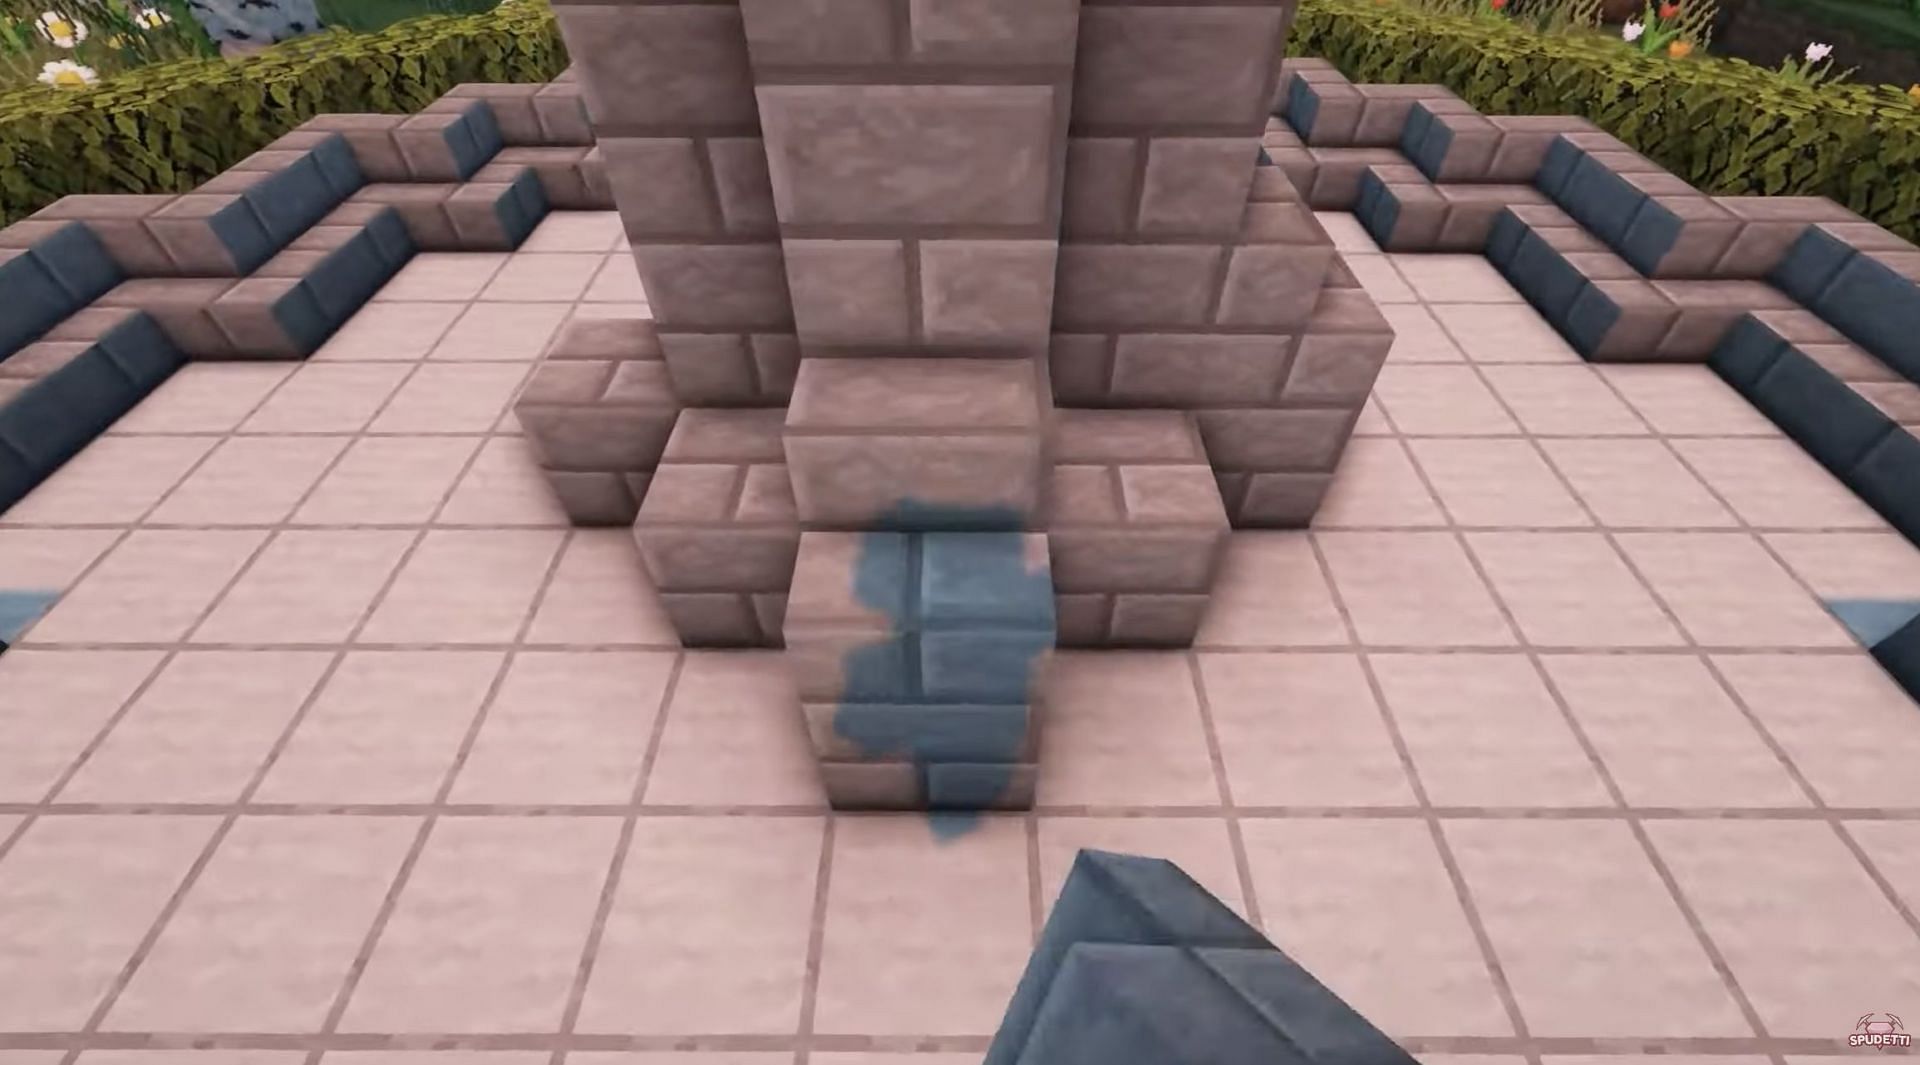 Stairs should be placed next (Image via YouTube/Spudetti)